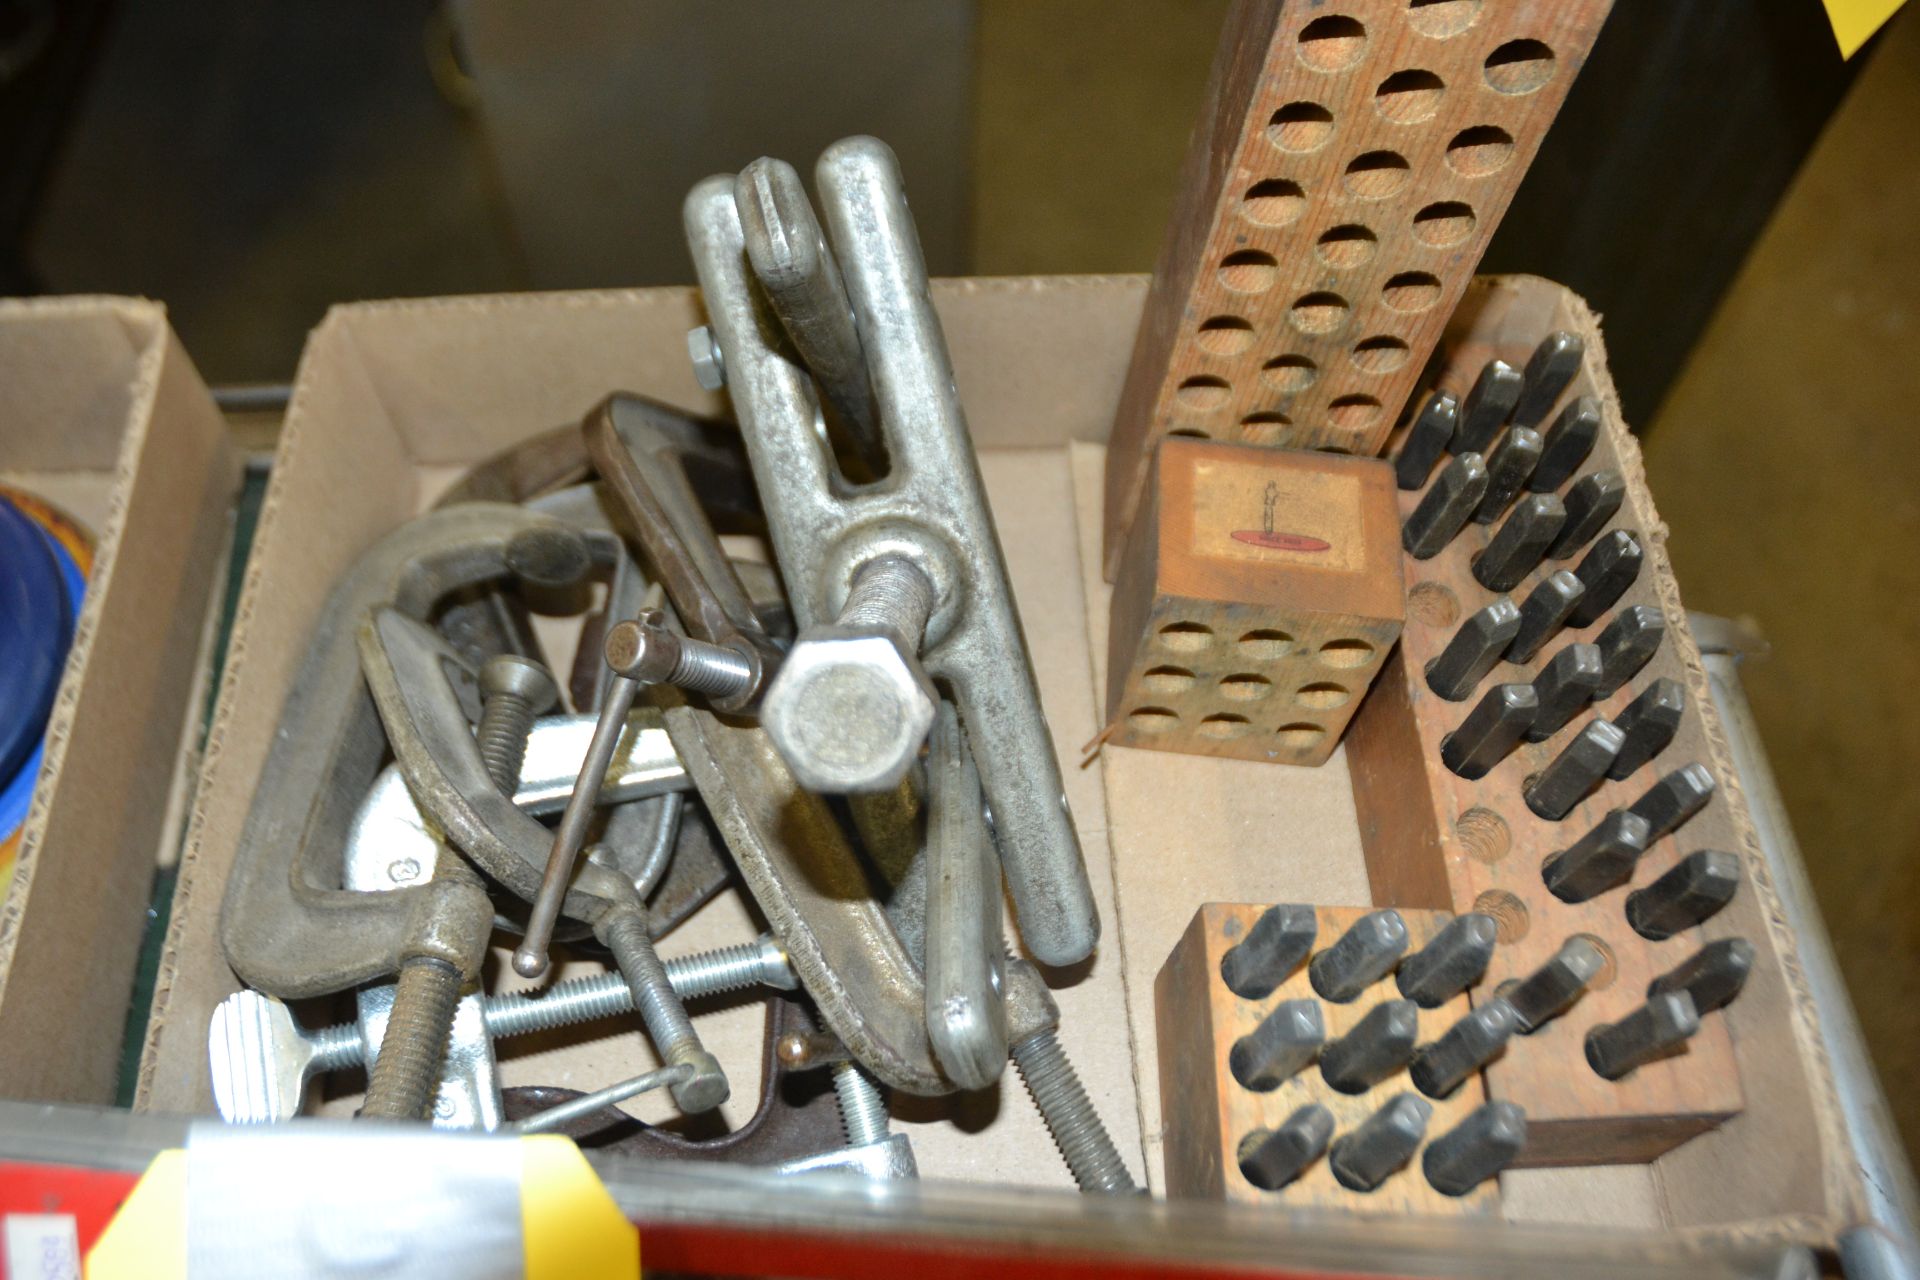 LOT - Misc. C-Clamps, Pipe Cutter, Bender, Etc. - Image 2 of 2